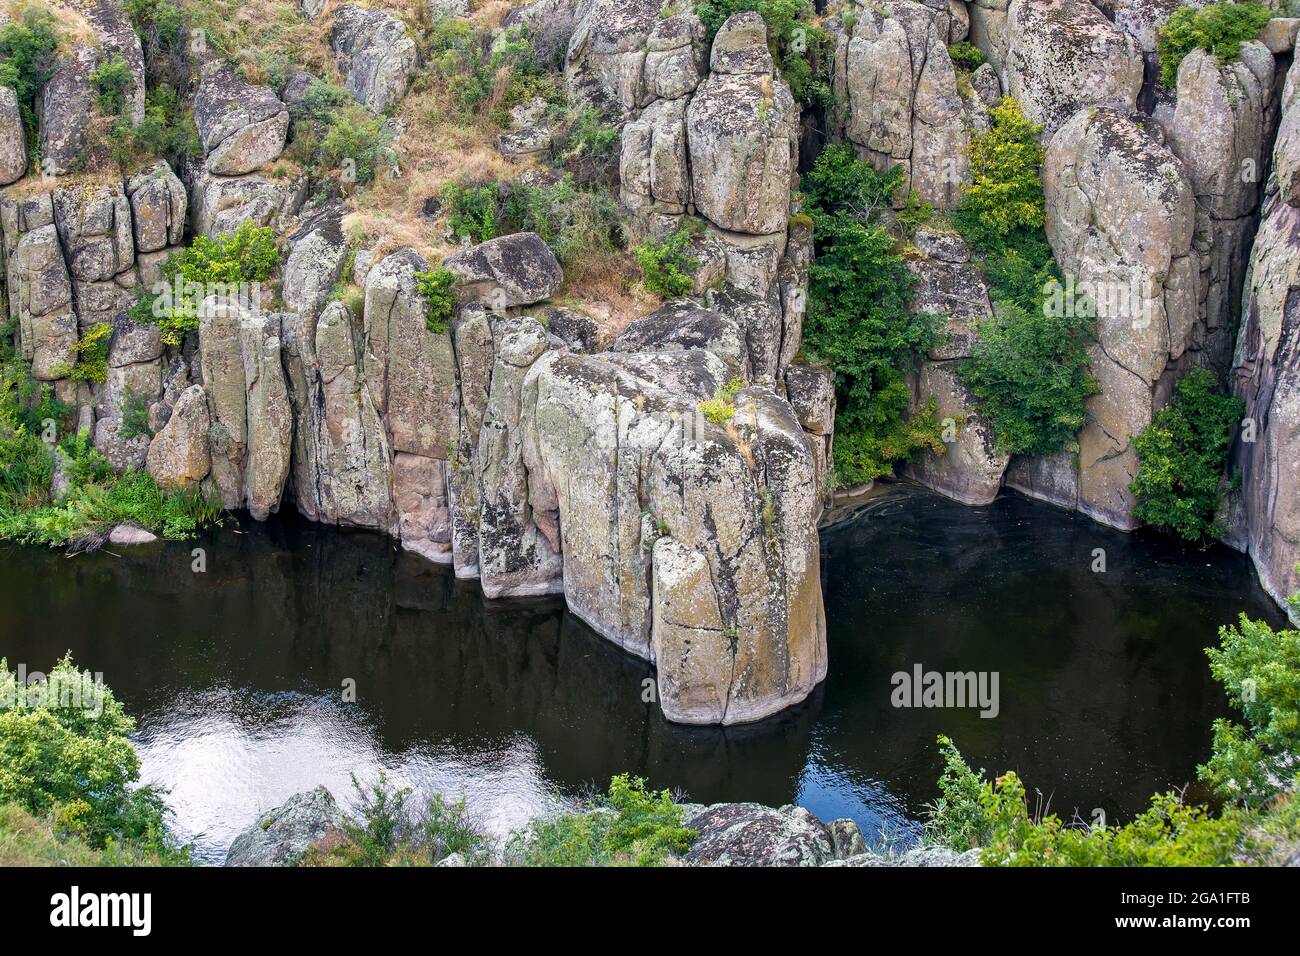 mountain river in a canyon with stone cliffs with trees summer landscape, nature for tourism and outdoor activities, nobody. Stock Photo